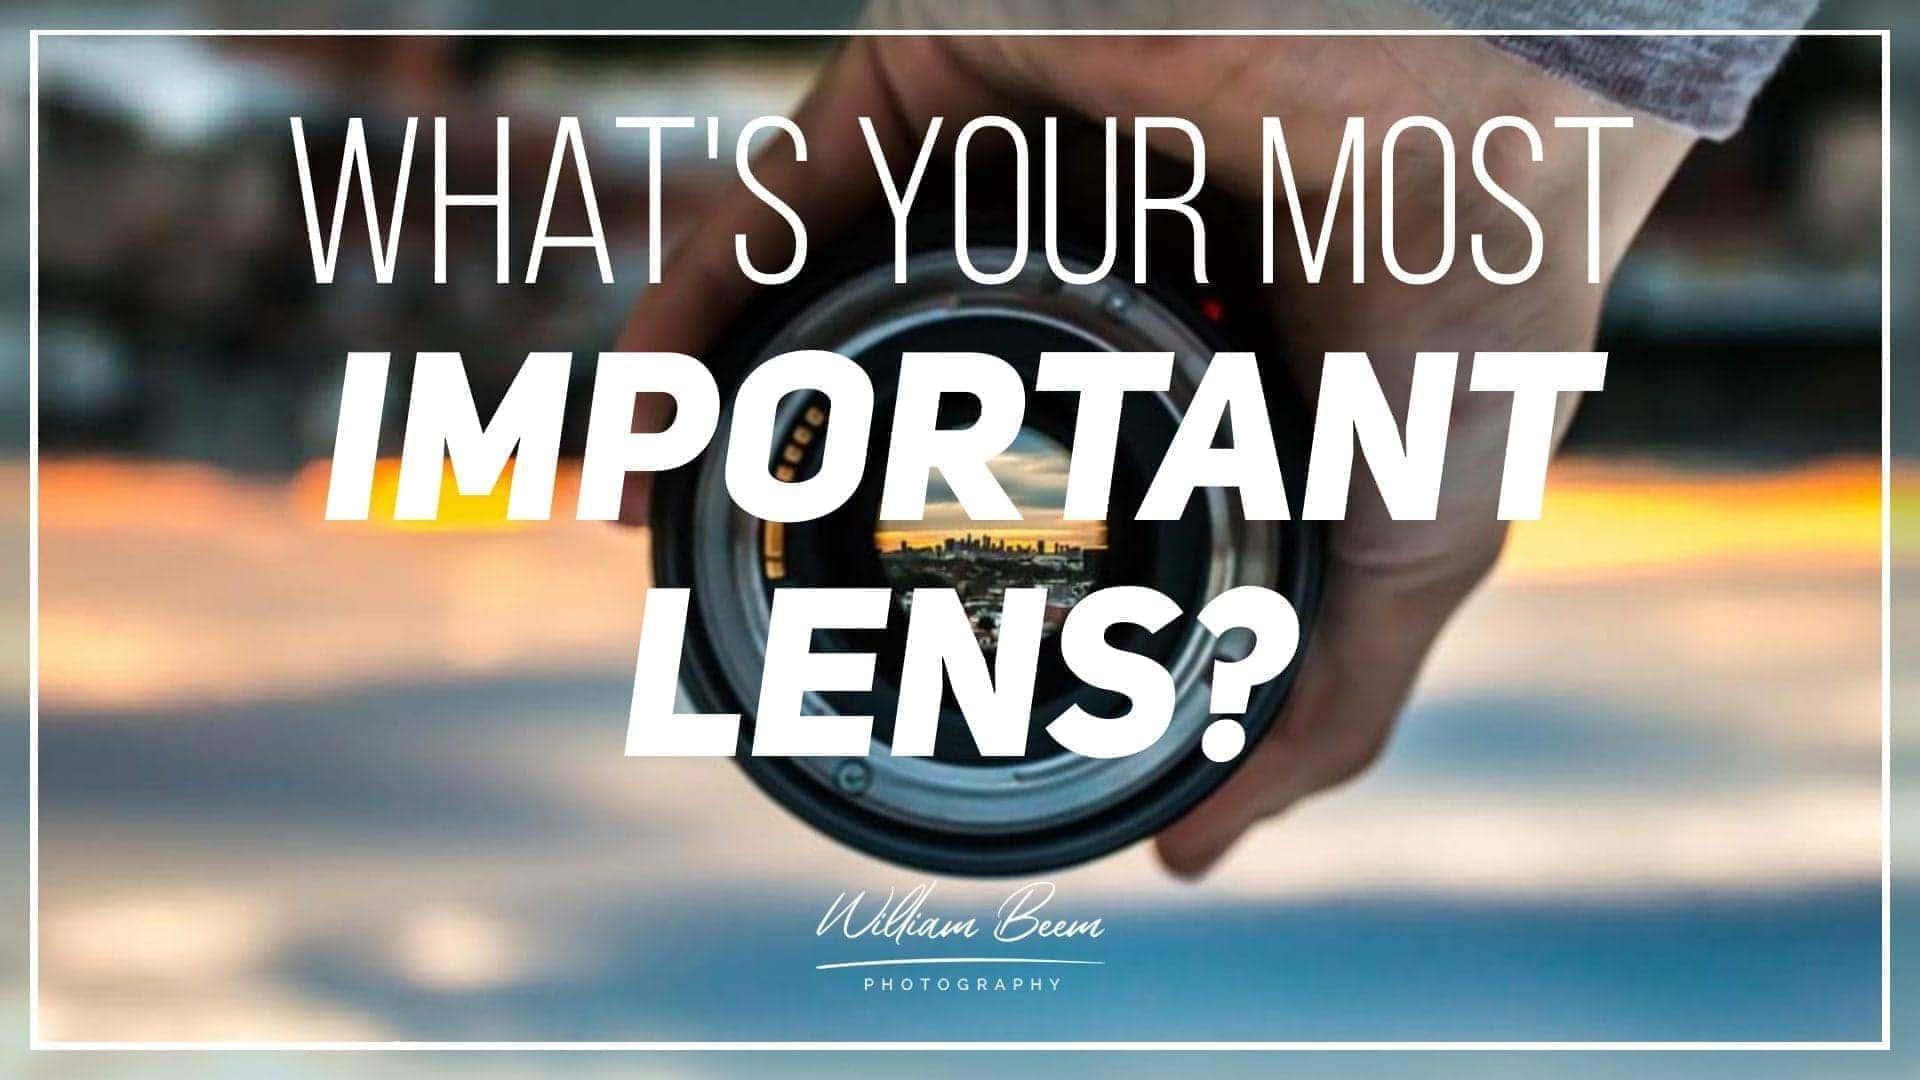 Your Most Important Lens